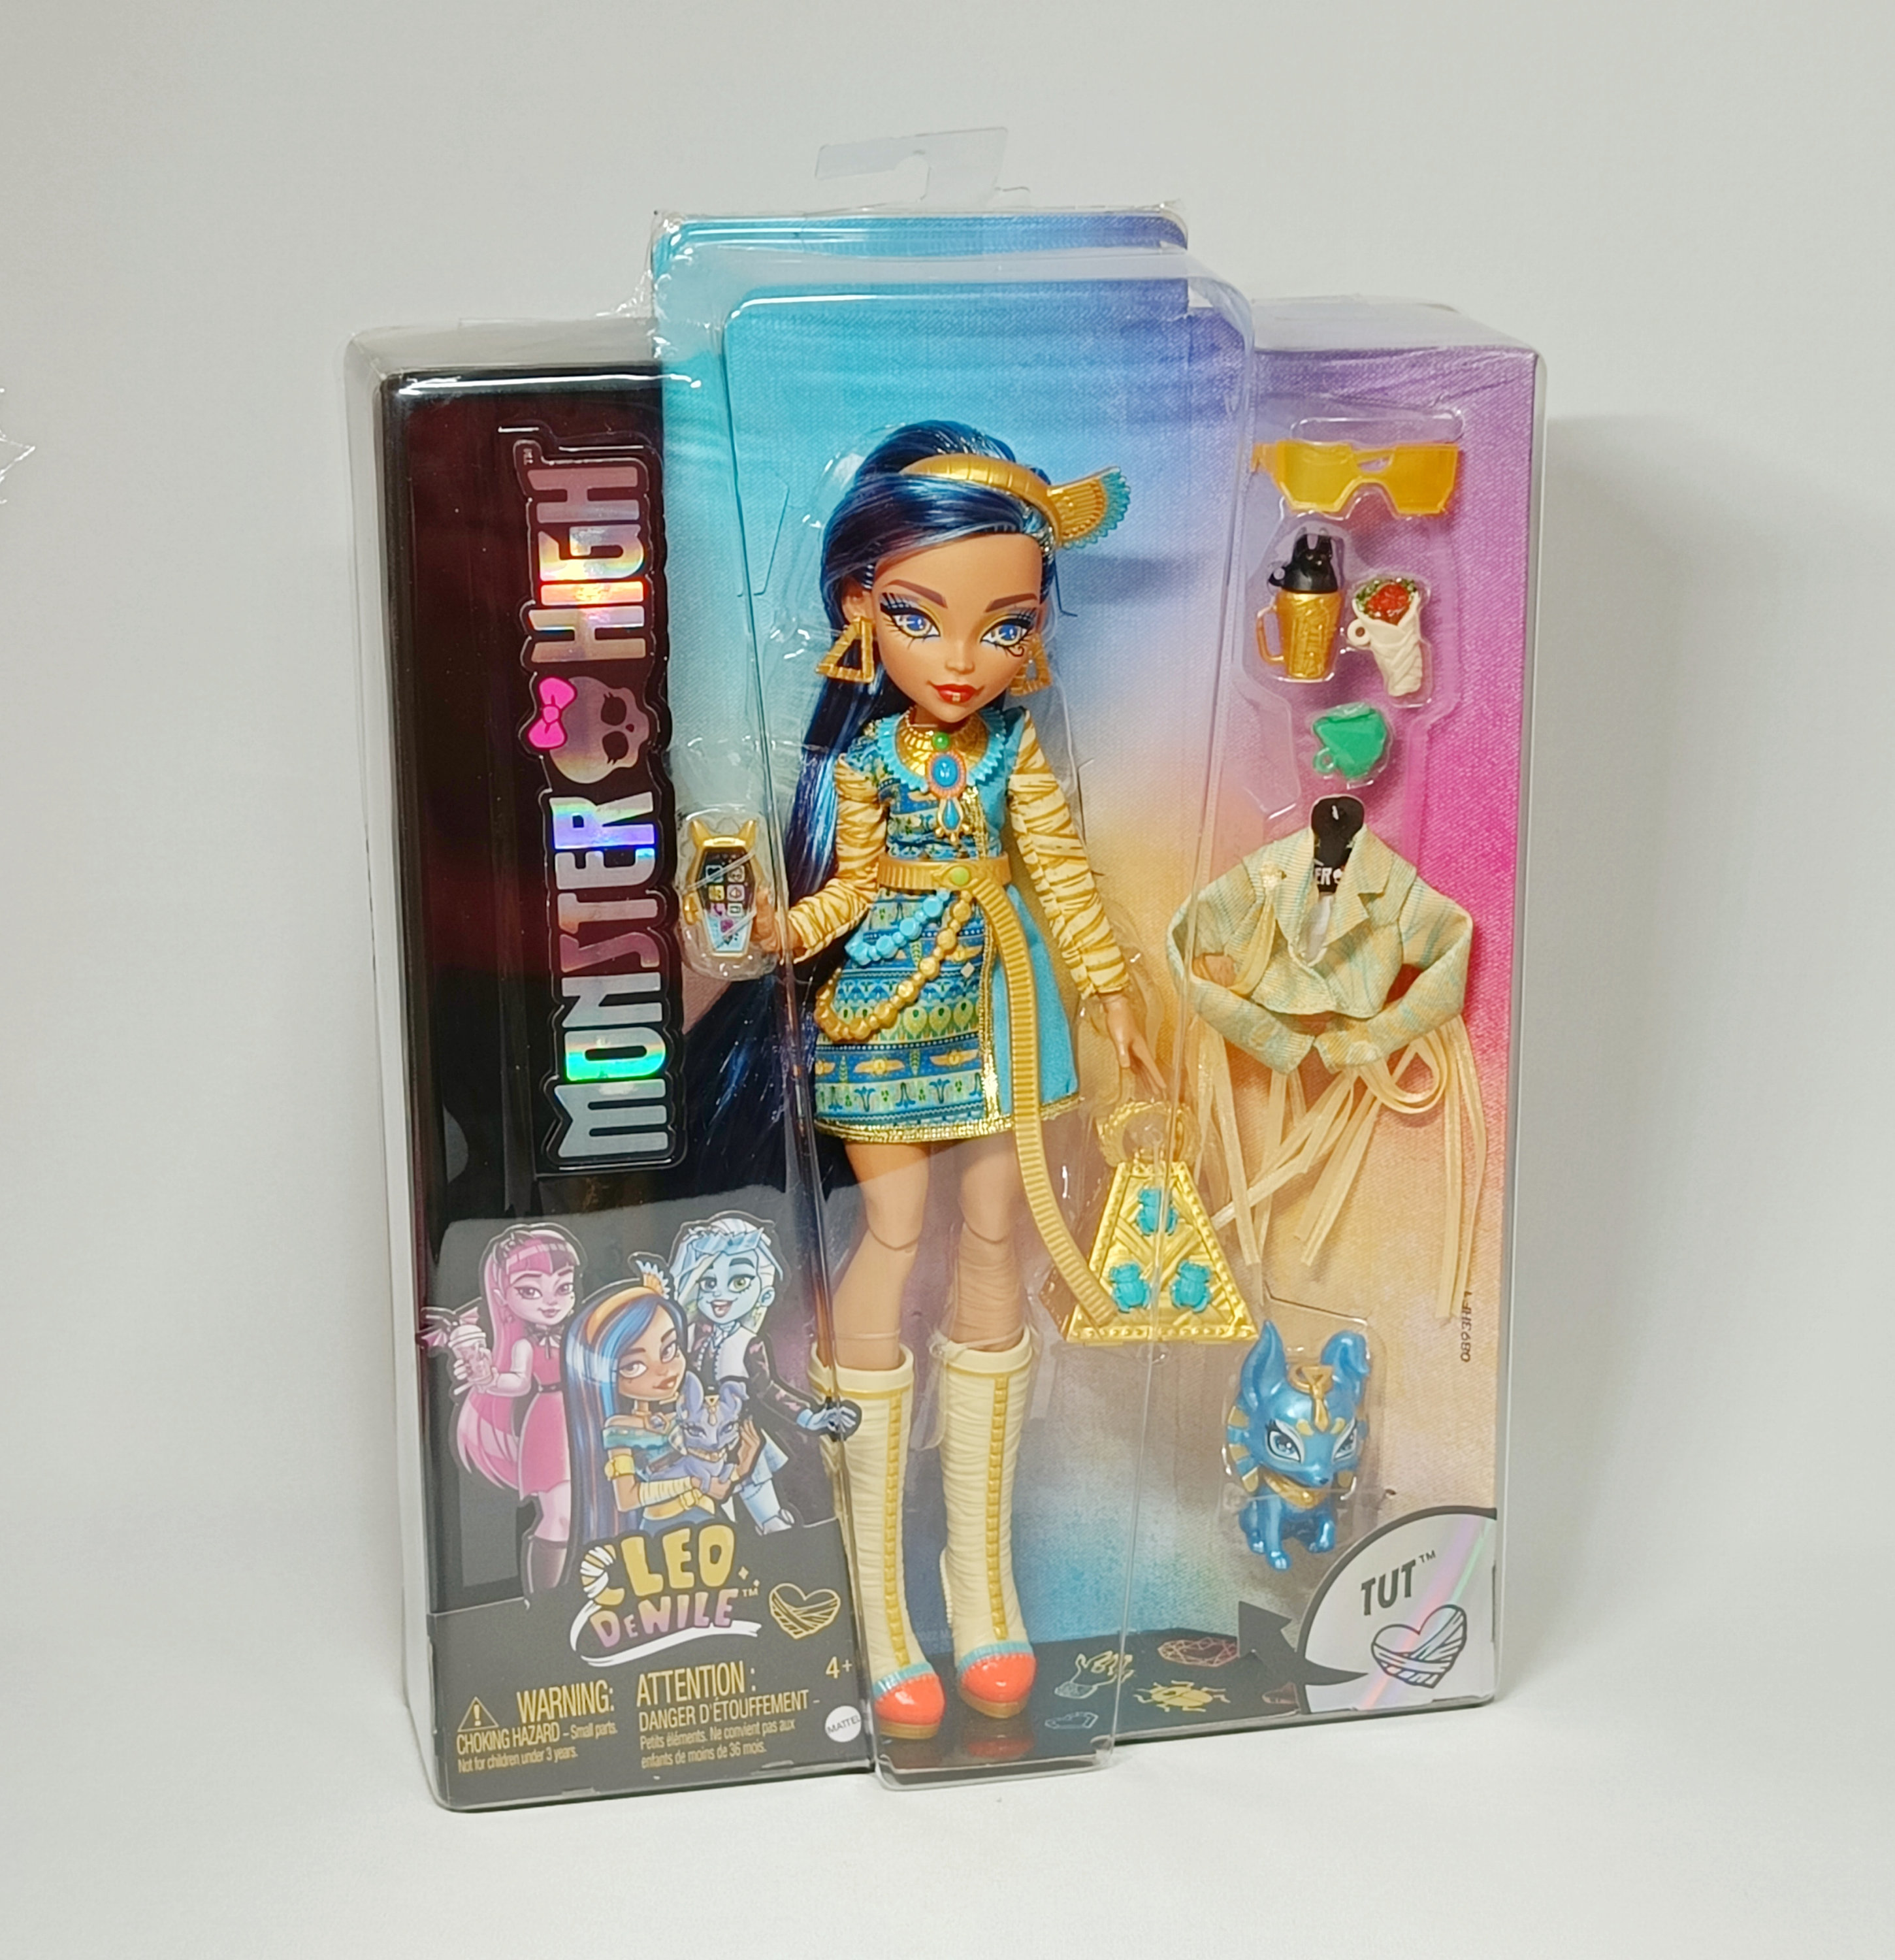 Authentic Monster High Mattel Doll Cleo De Nile Ballerina Ghouls Take a  Note to Description 